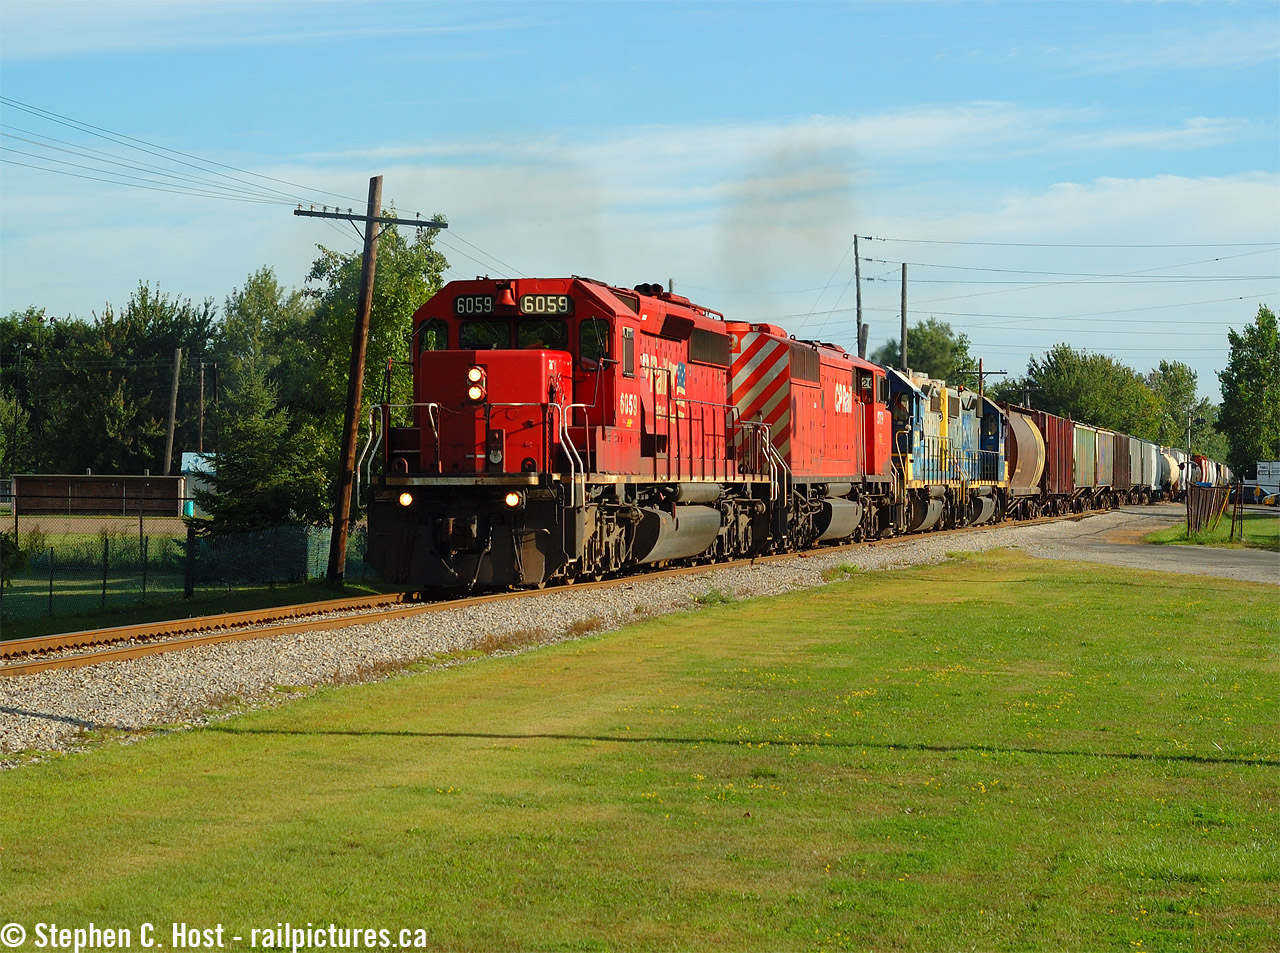 With about 80 cars on the drawbar, CSXT D725 is finally underway southbound to Chatham rolling between the Baseball fields of Corunna. The CSX power trailing the CP SD40-2F will be used on a Chatham-Blenheim-Sarnia D724 in the afternoon, shortly after arrival of this train in Chatham around 1300. It was a slow journey from Sarnia to Chatham, about 7-8 hours after the crew got on duty in Sarnia and usually meant there was a new crew needed for the northbound journey.
Here's an audio link recordedthis day. Detector at Mile 51 (Note 86 cars, subtract the engines for the total car count.. and what about that blistering speed.. )